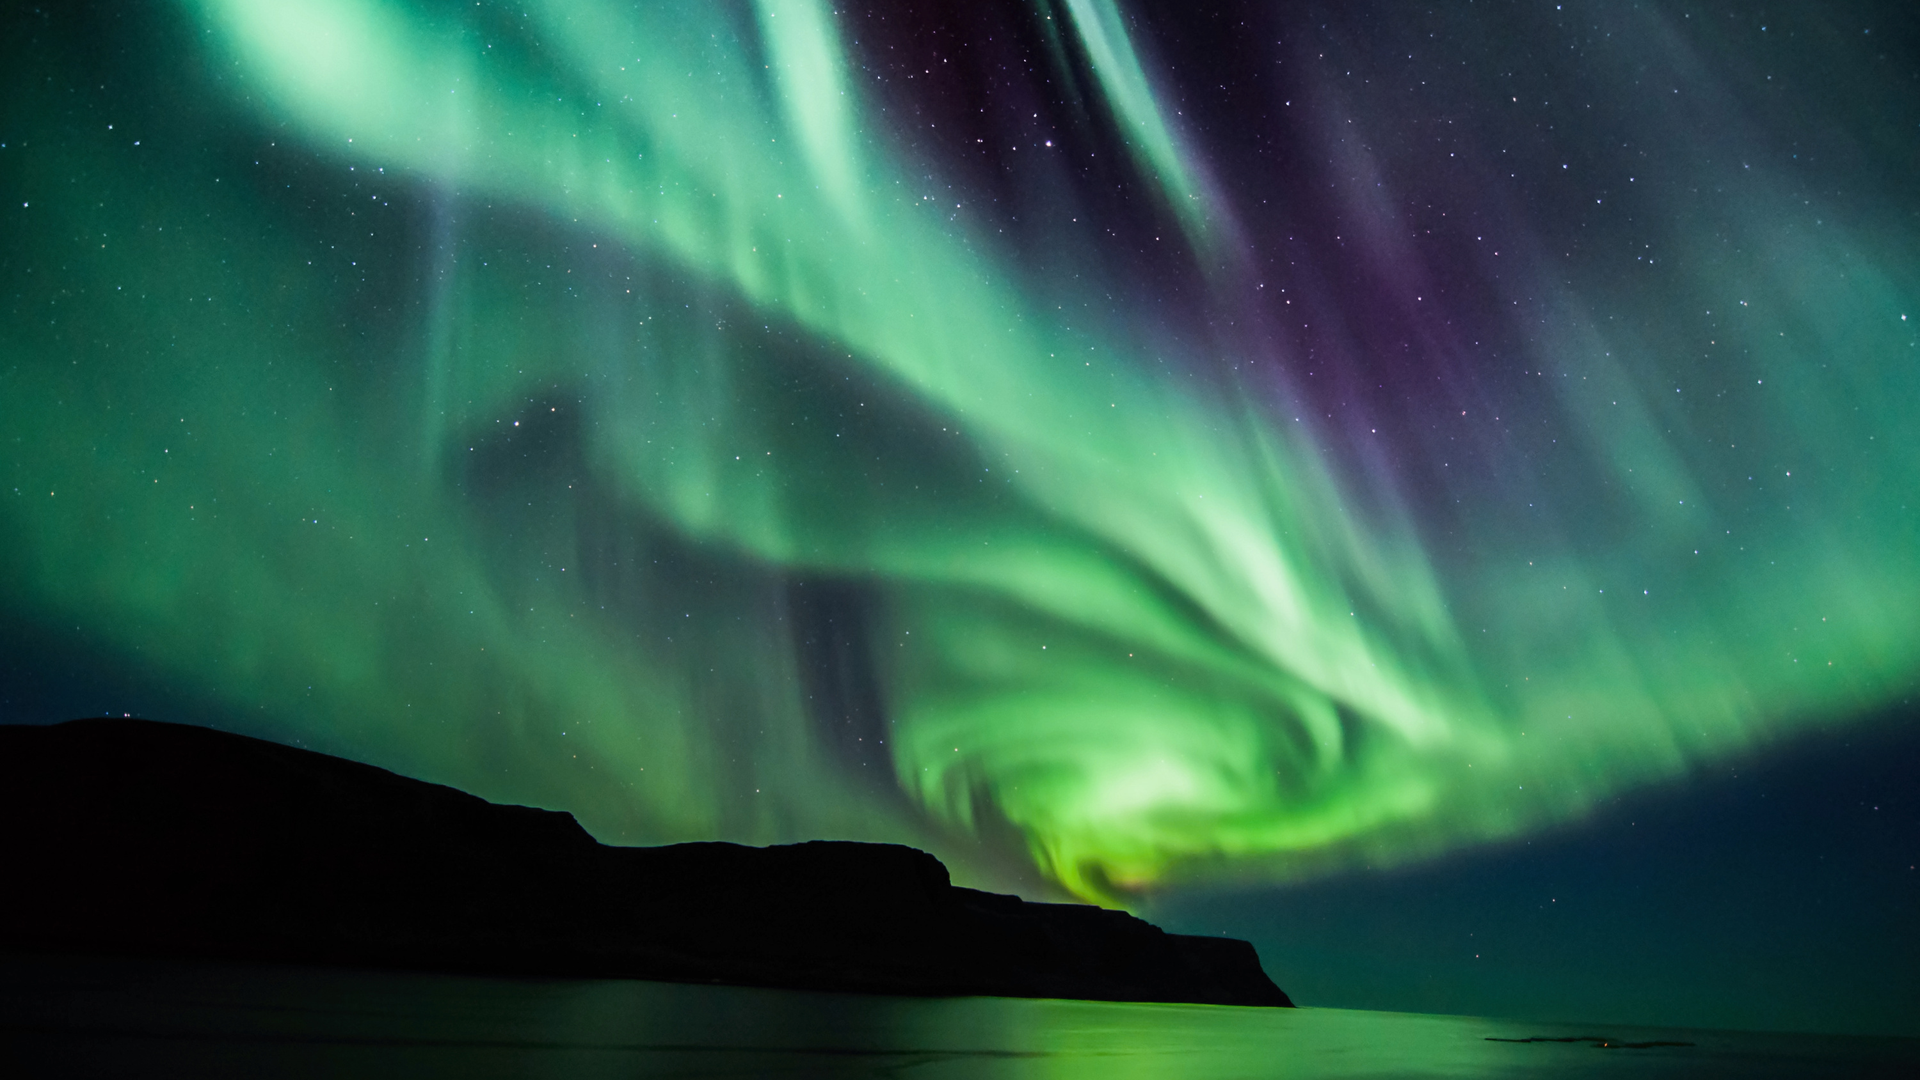 Scientists Now Know For Sure What Causes the Northern Lights